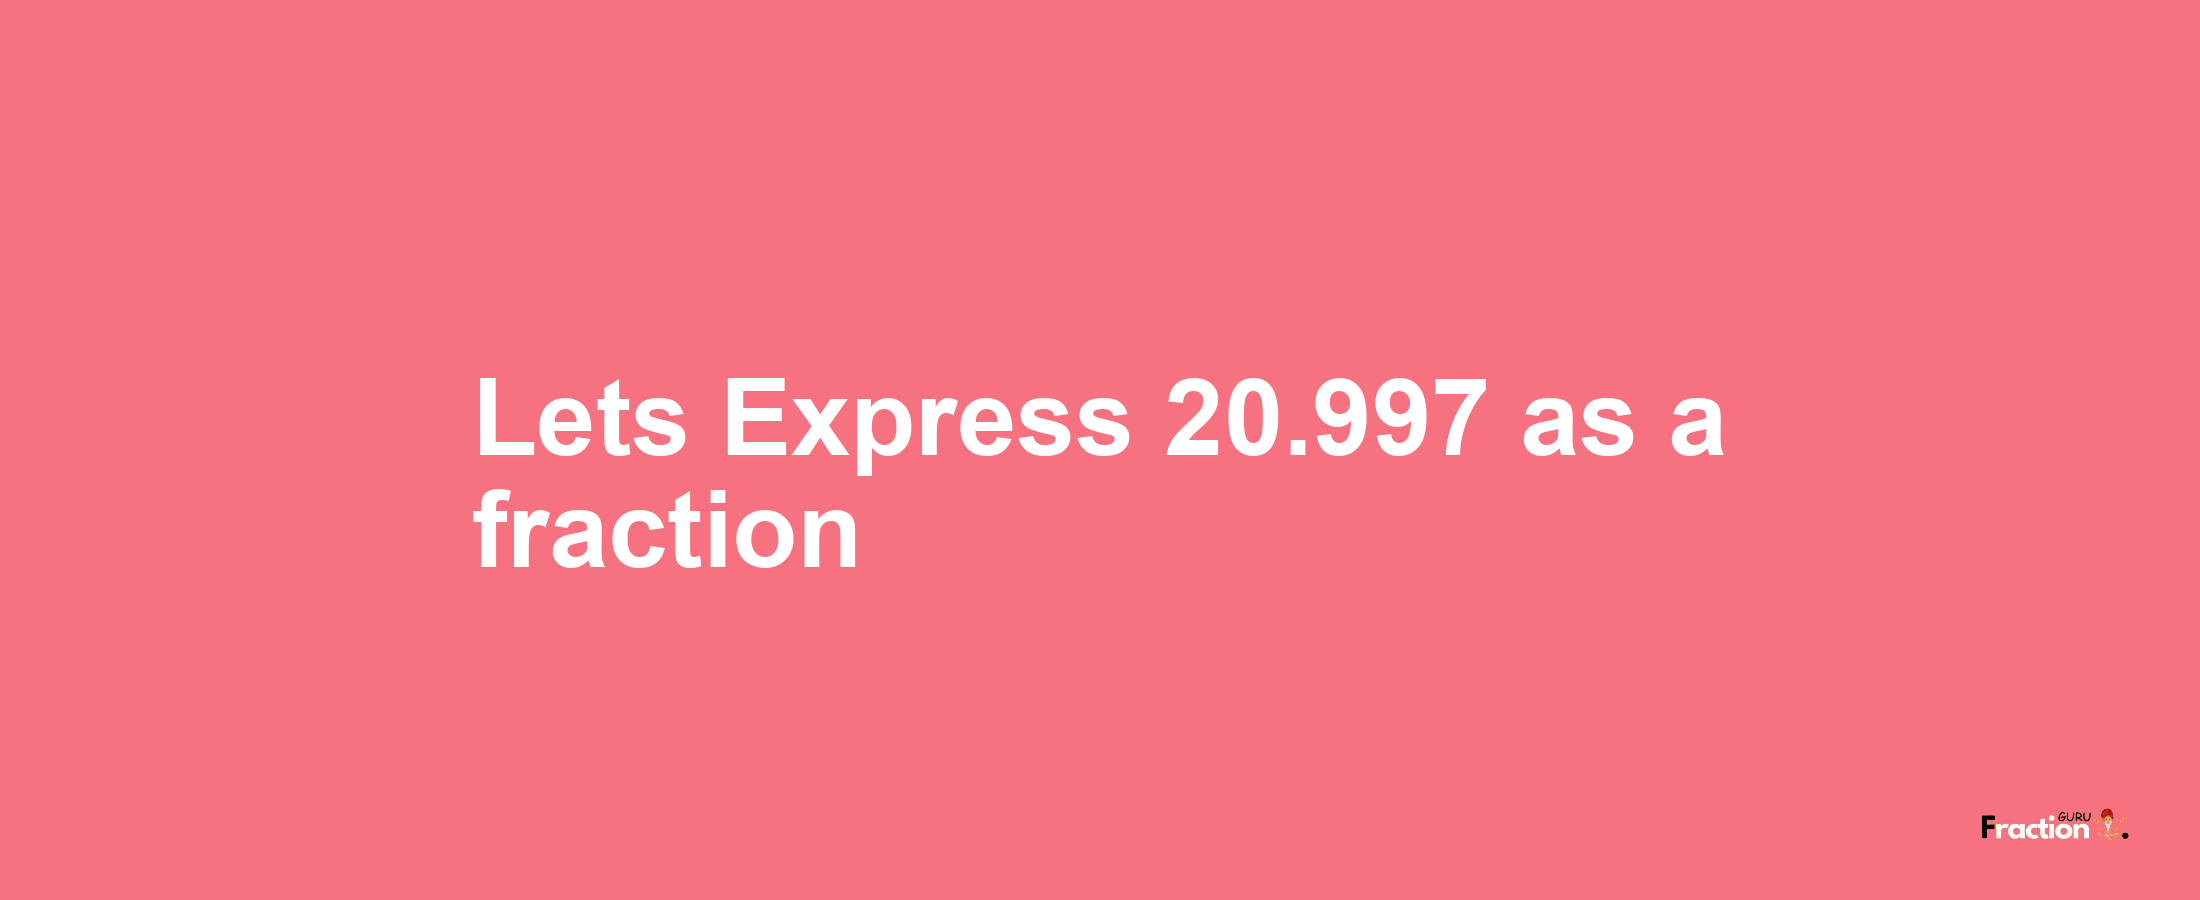 Lets Express 20.997 as afraction